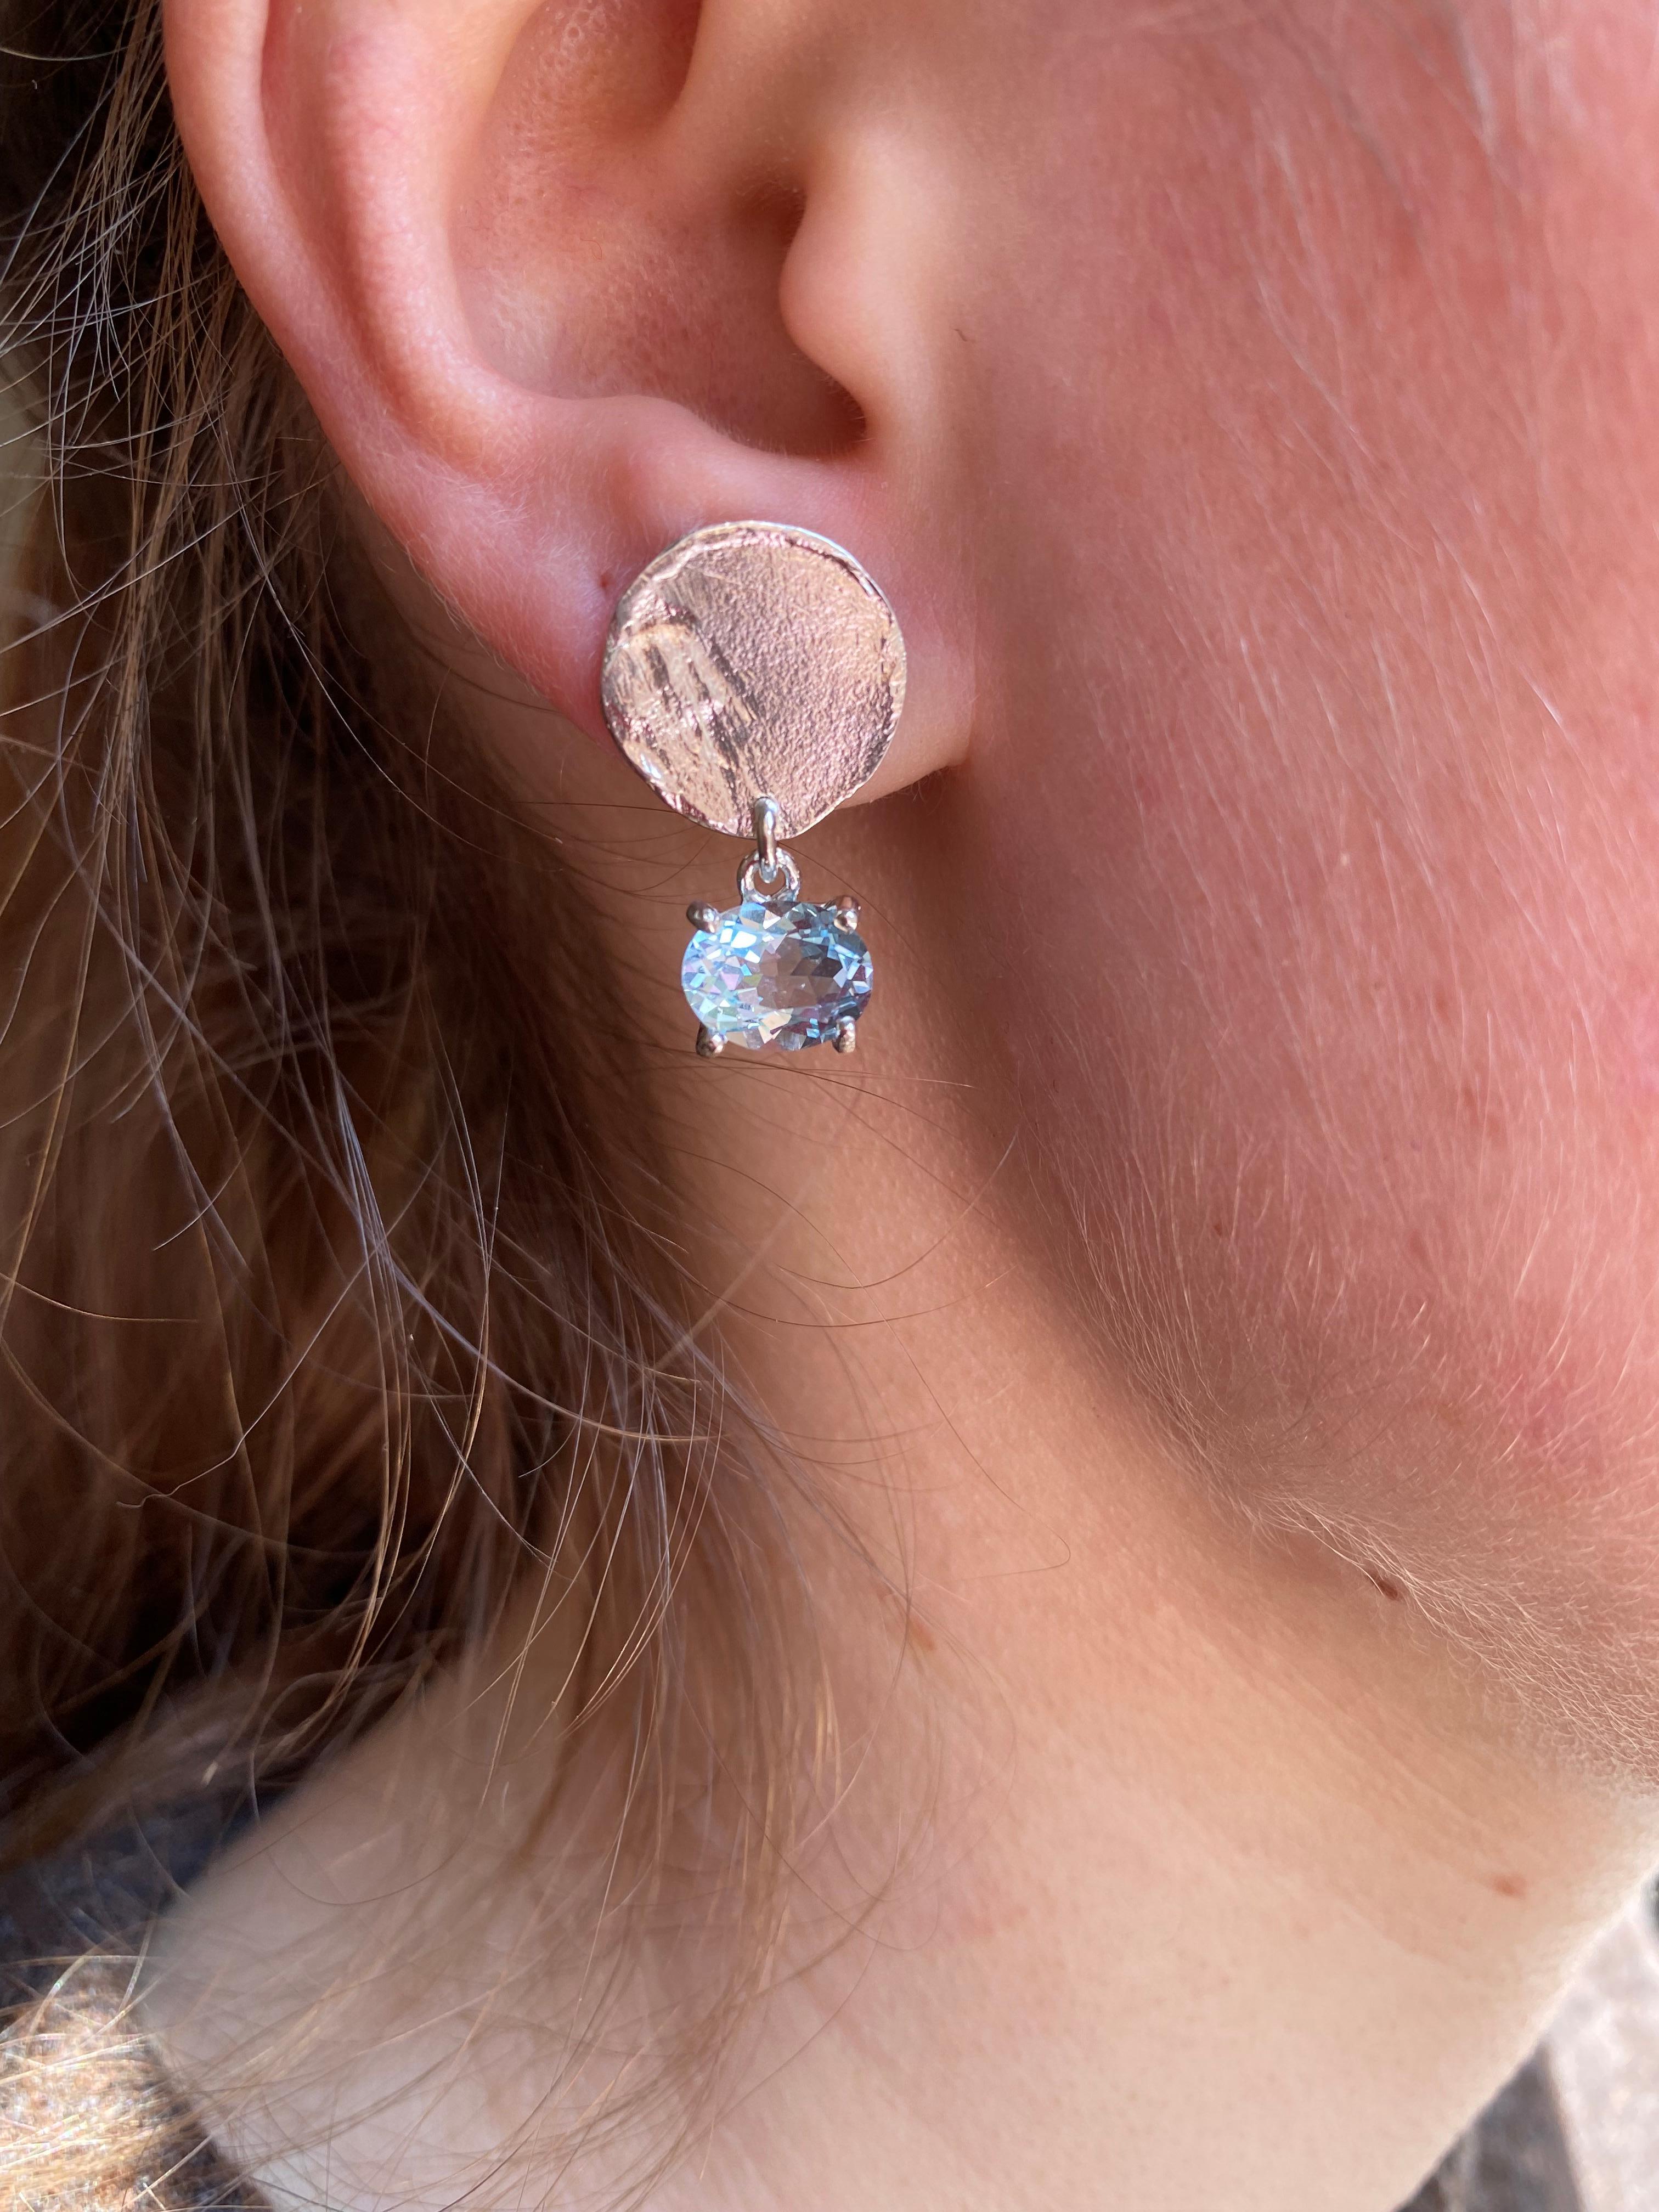 Rossella Ugolini Design Collection , a Modern Style Blue Moon Sterling Silver Topaz Handcrafted Dangle Design Earrings openly inspired to the color and the light of the full moon. The sculptural design provides an extra shiny surface of the disk and